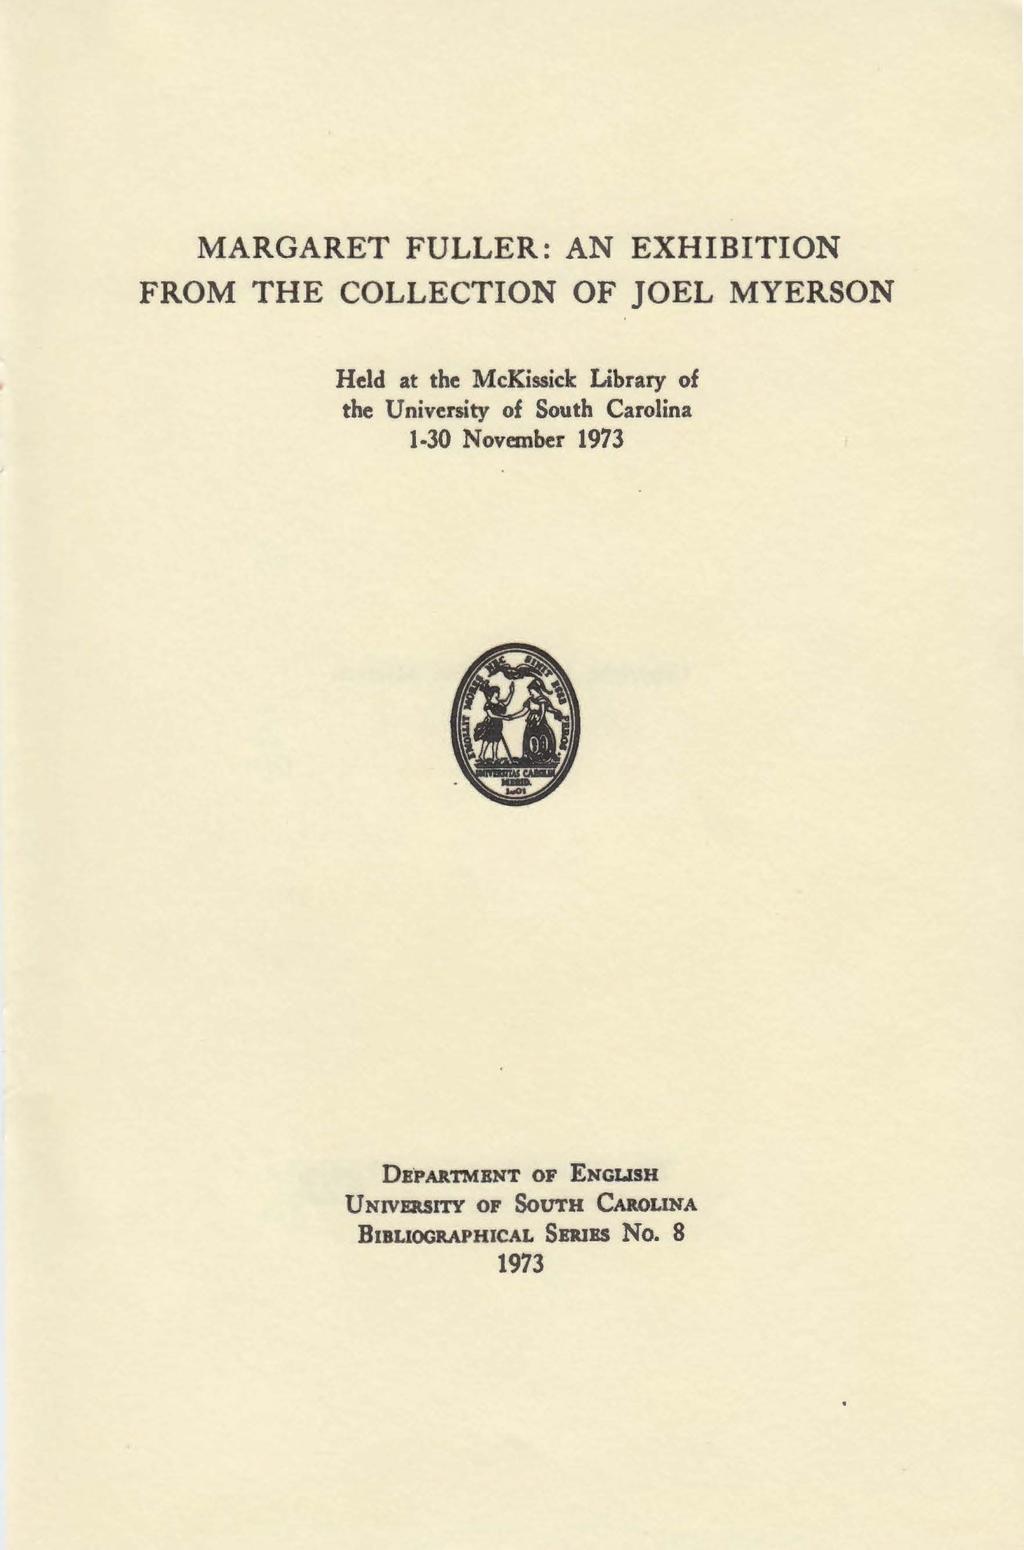 MARGARET FULLER: AN EXHIBITION FROM THE COLLECTION OF JOEL MYERSON Held at the McKissick Library of the University of